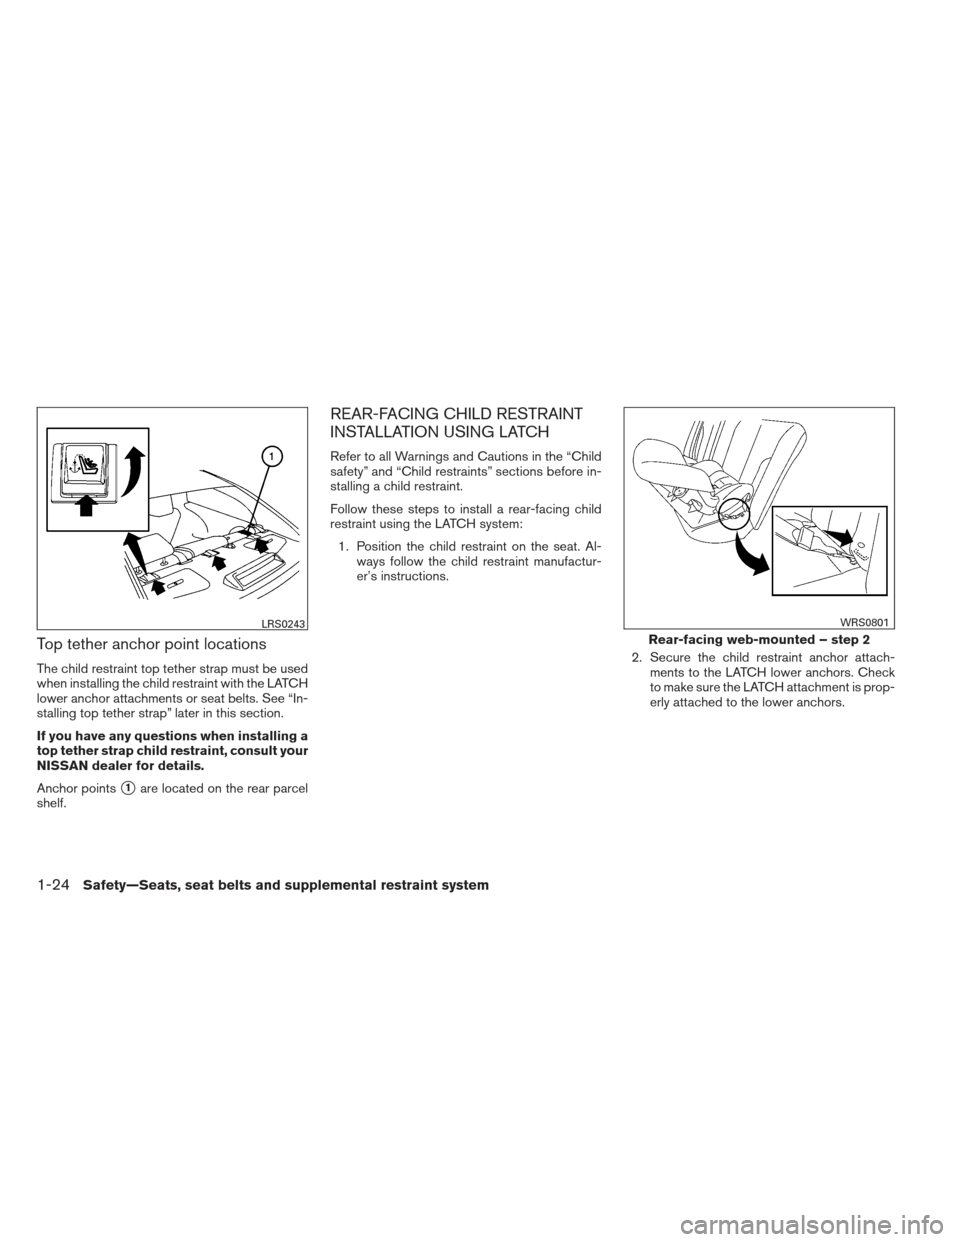 NISSAN MAXIMA 2013 A35 / 7.G Service Manual Top tether anchor point locations
The child restraint top tether strap must be used
when installing the child restraint with the LATCH
lower anchor attachments or seat belts. See “In-
stalling top t